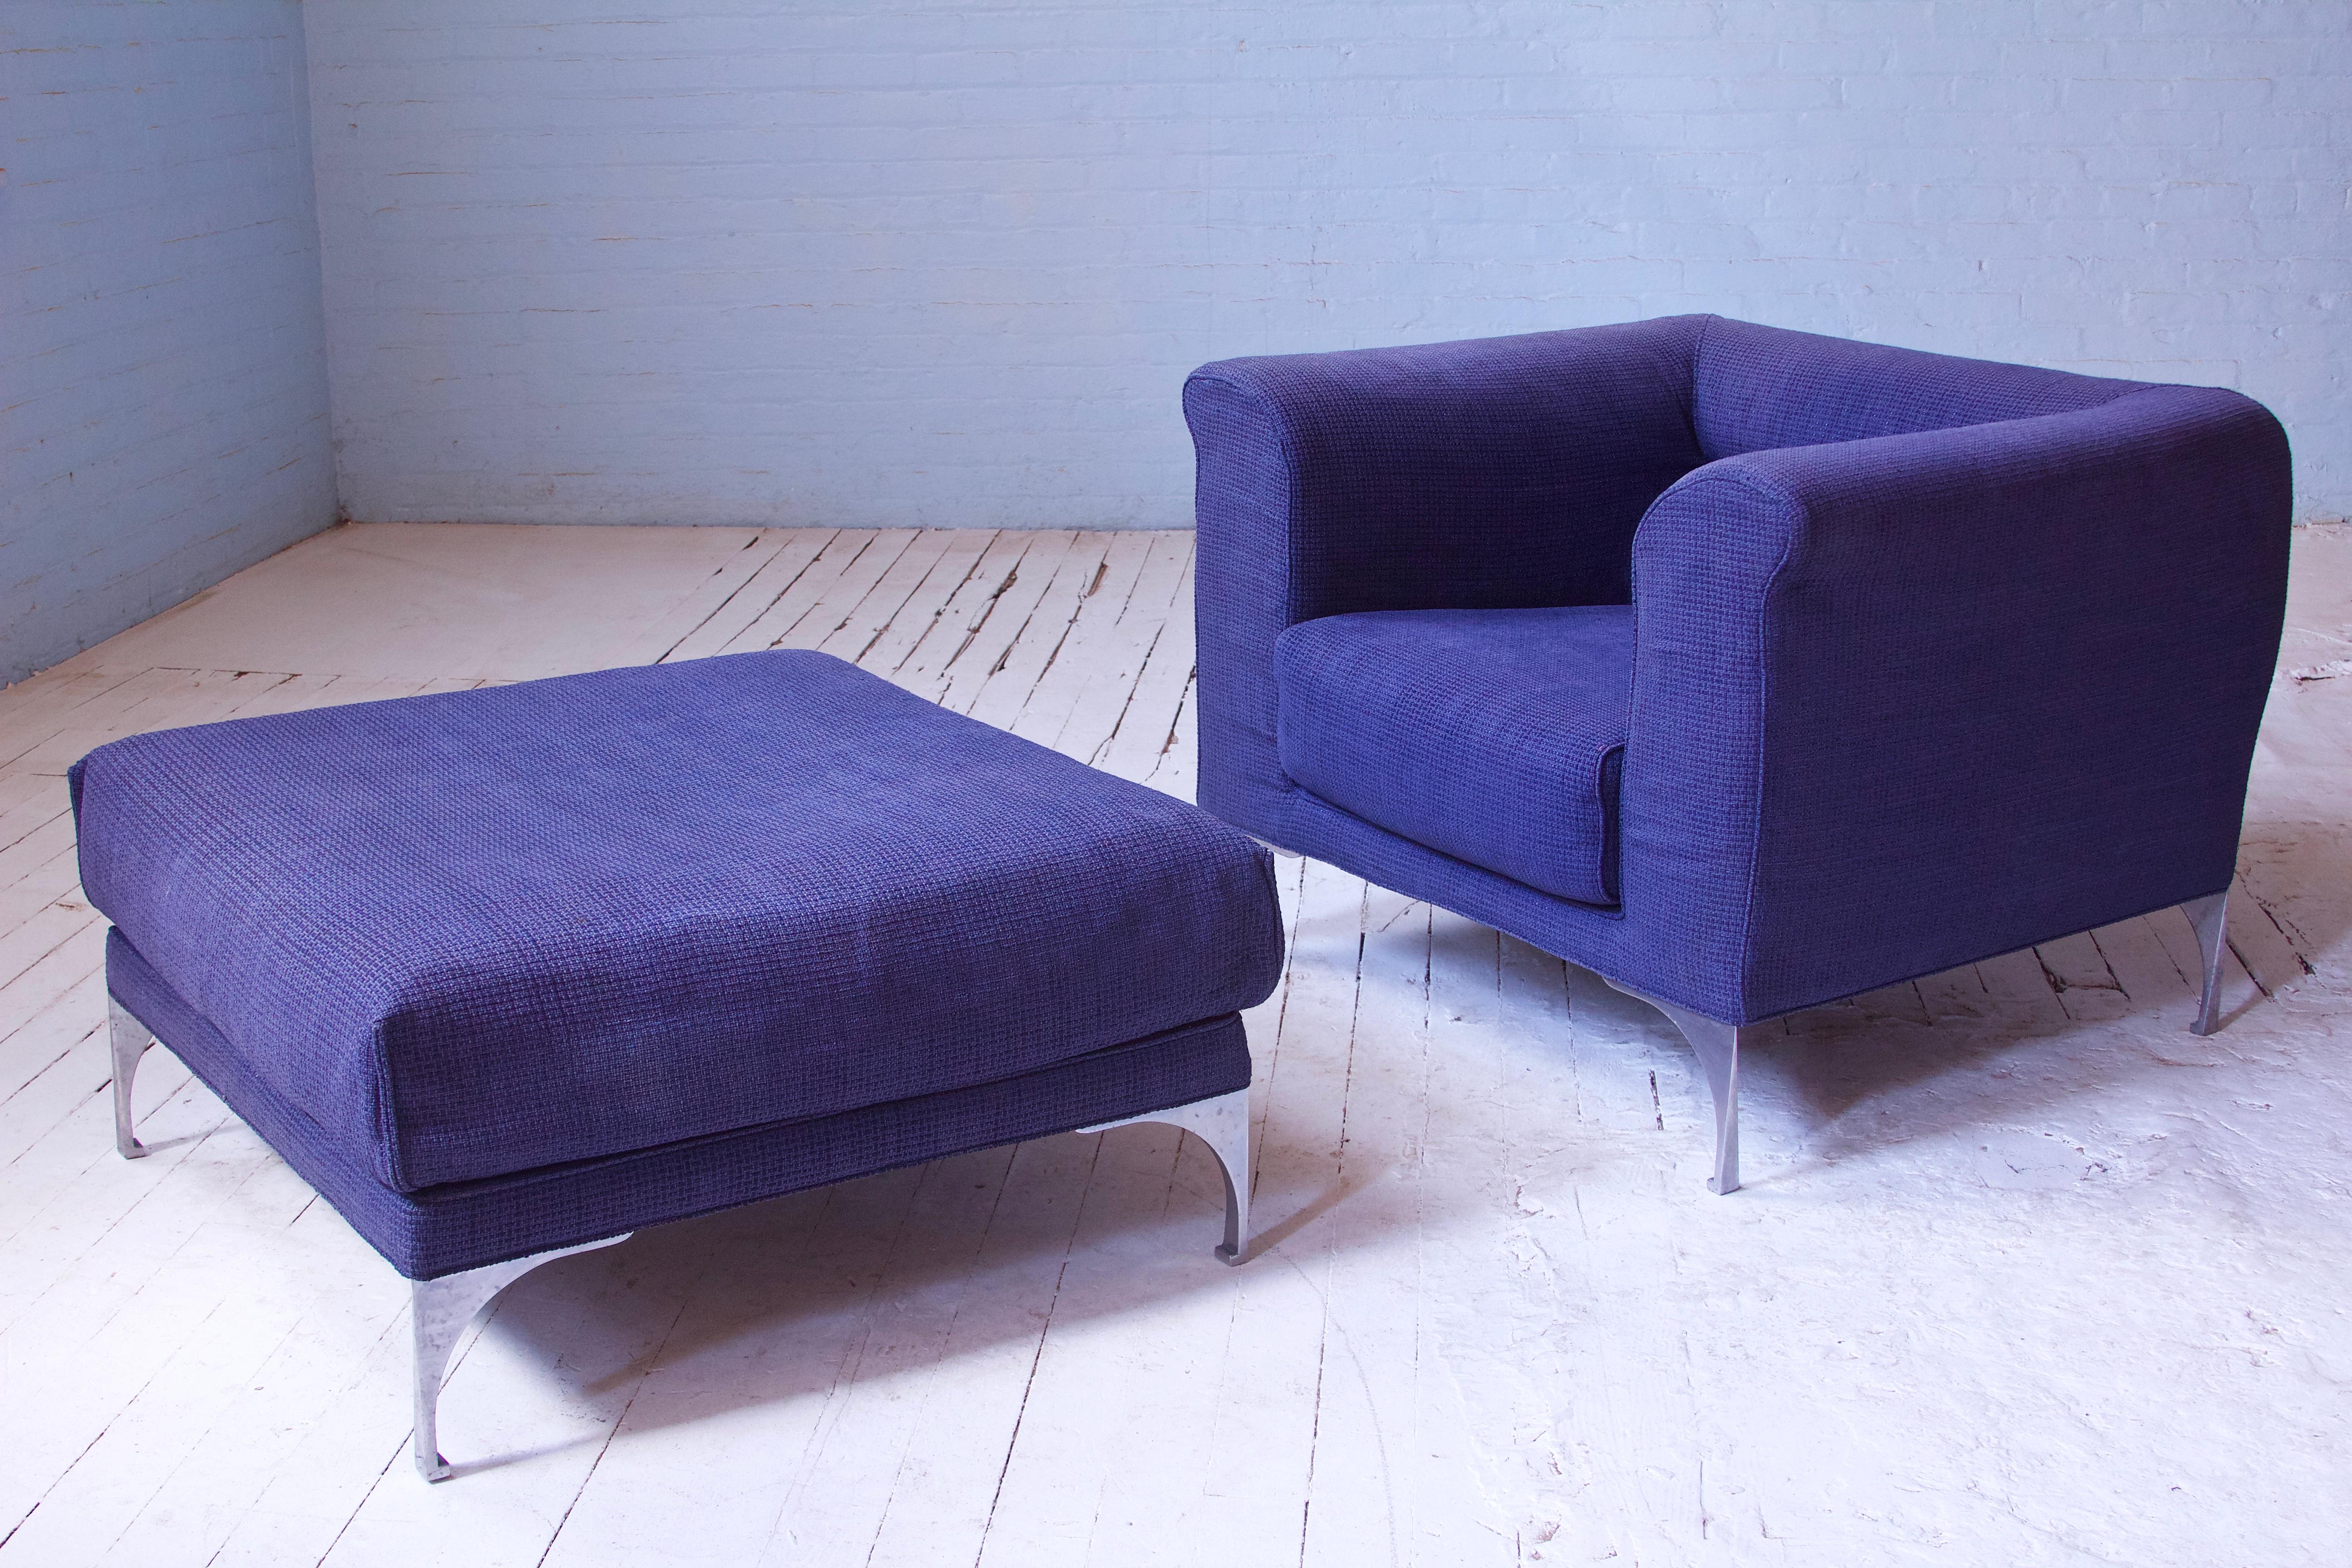 A commodious and attractive lounge chair and ottoman by Roche Bobois in blue wool and chrome legs. Very comfortable and supportive set with unique modern cast and polished chrome legs. Nice subtle tapering to the silhouette of the lounge chair